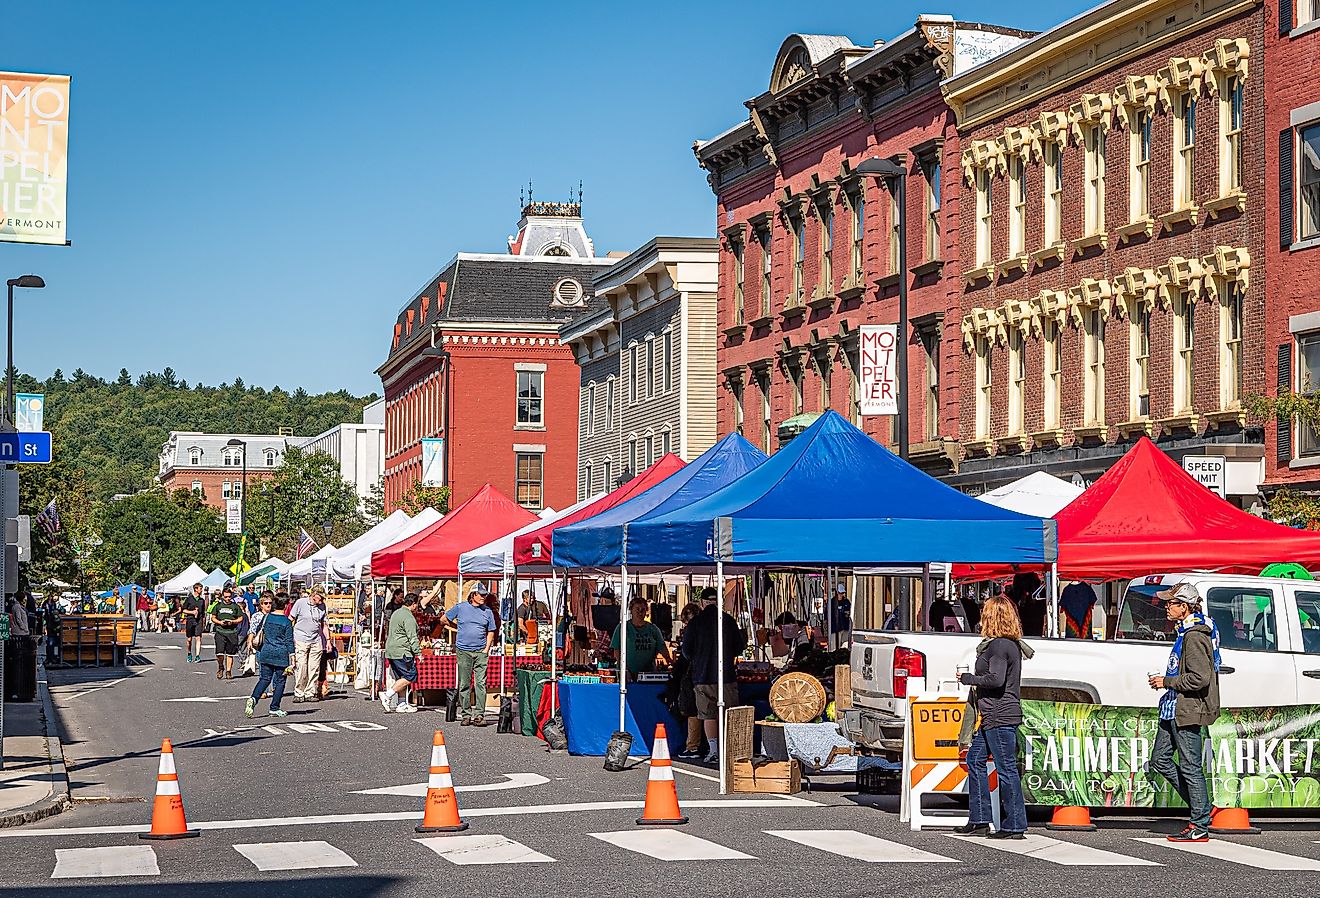 Summer farmers market at State St. and Main in Montpelier, Vermont. Image credit Phill Truckle via Shutterstock